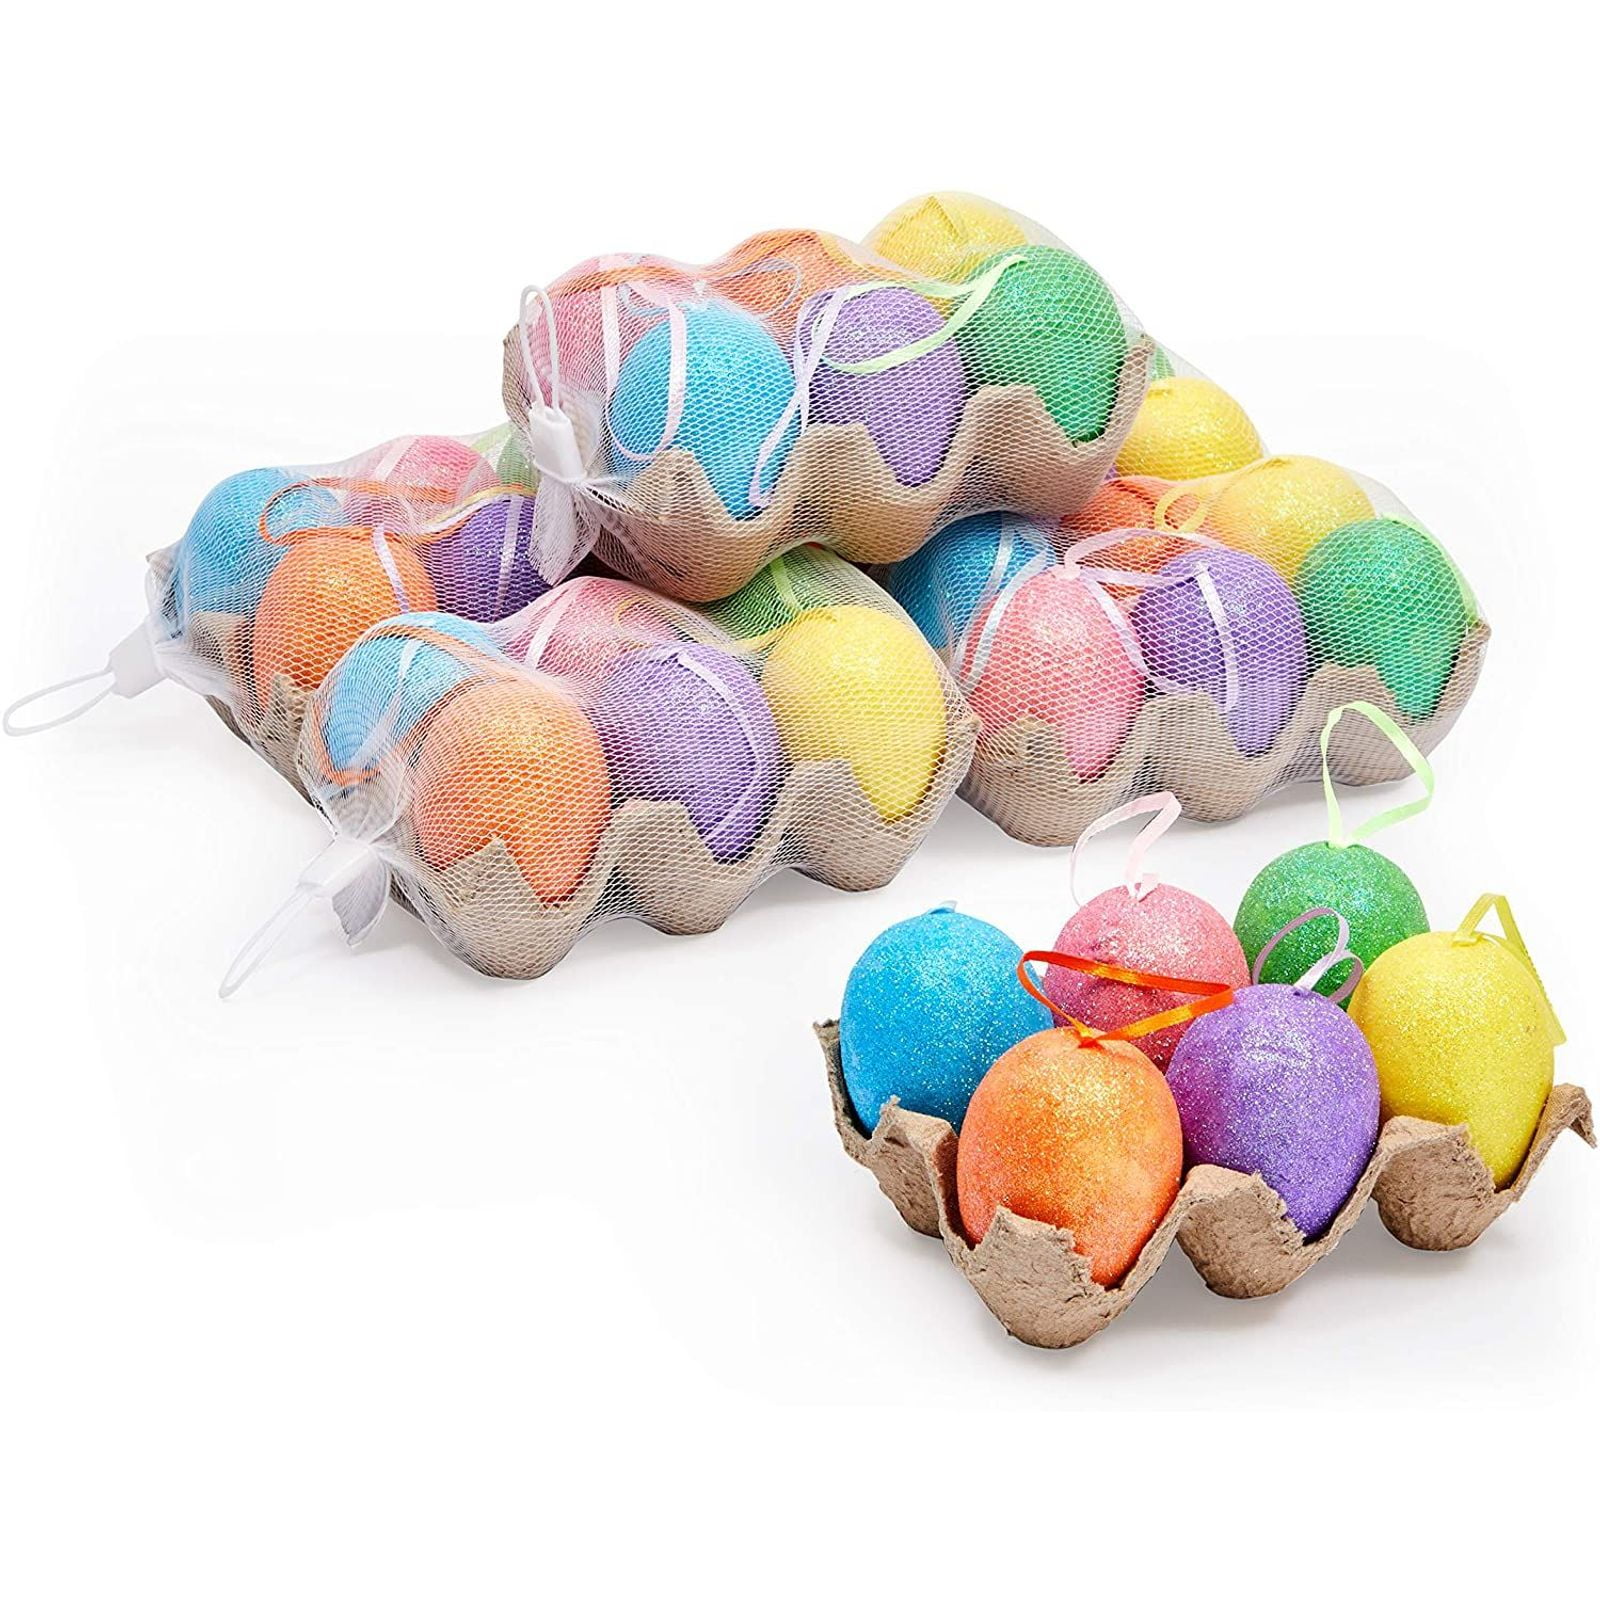 40 Pieces Plastic Easter Eggs Ornaments Printed Hanging Eggs Colorful Decorative Hand Painted Eggs for Kids DIY Crafts Painting Spring Easter Party Tree Hanging Decoration 